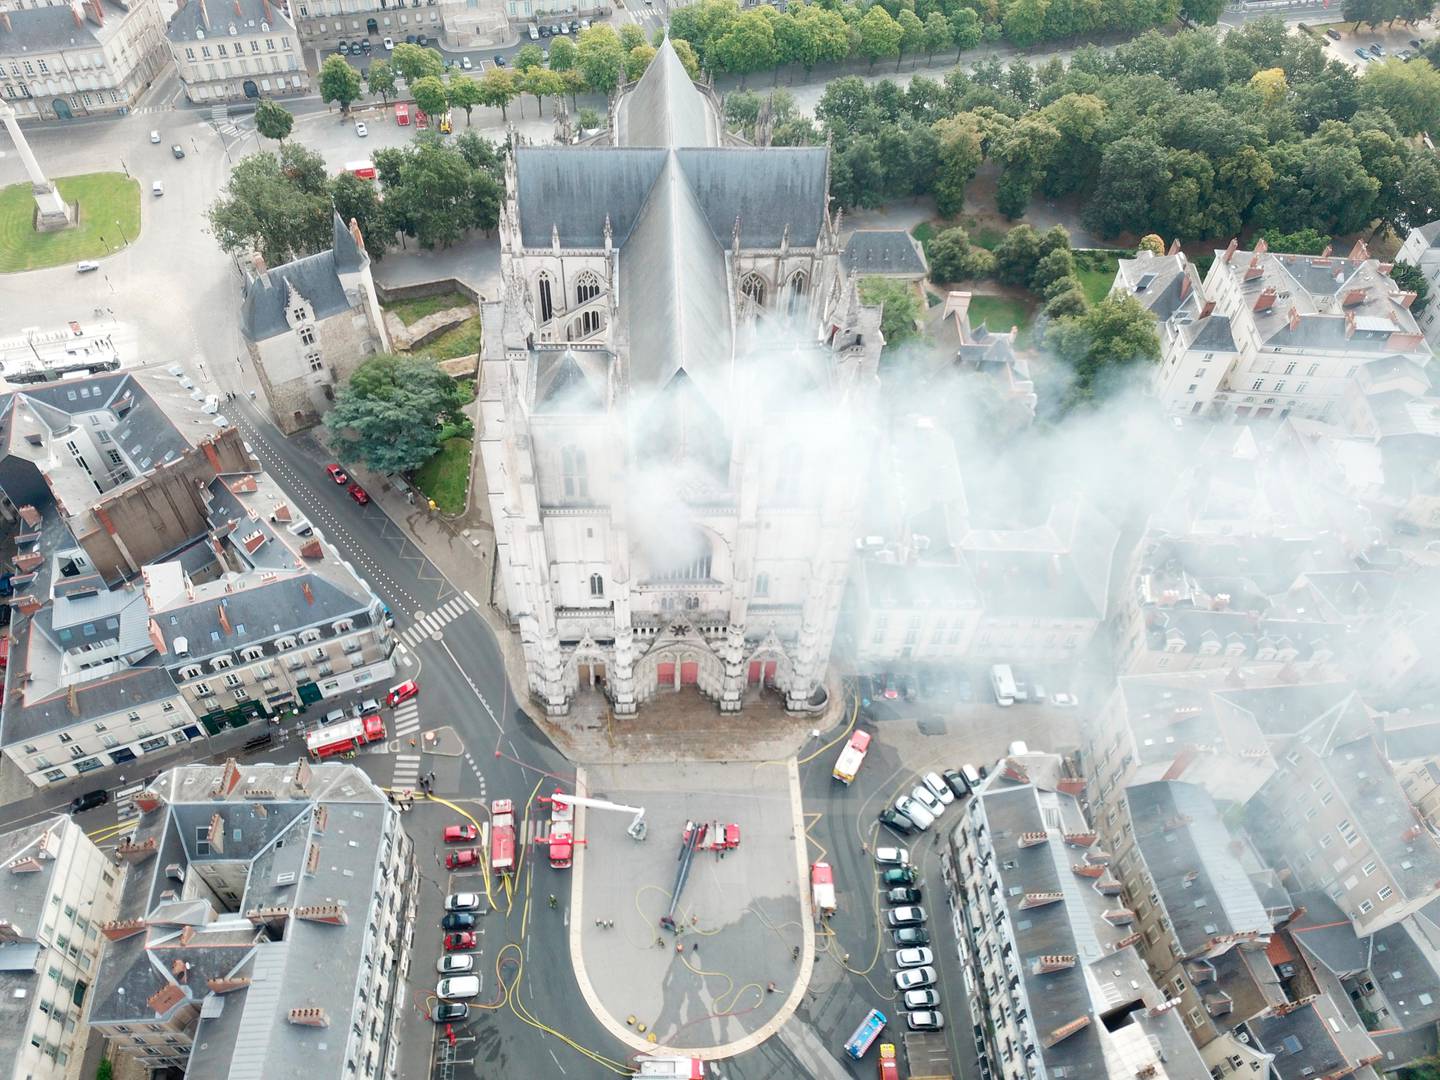 In this image provided by SDIS 44 Department of Fire and Rescue, fire fighters work to extinguish the blaze at the Gothic St. Peter and St. Paul Cathedral, in Nantes, western France, Saturday, July 18, 2020. French officials launched an arson inquiry Saturday after the fire broke out destroying the organ, shattered stained glass windows and sent black smoke spewing from between the cathedral towers. (SDIS 44 Department of Fire and Rescue via AP)